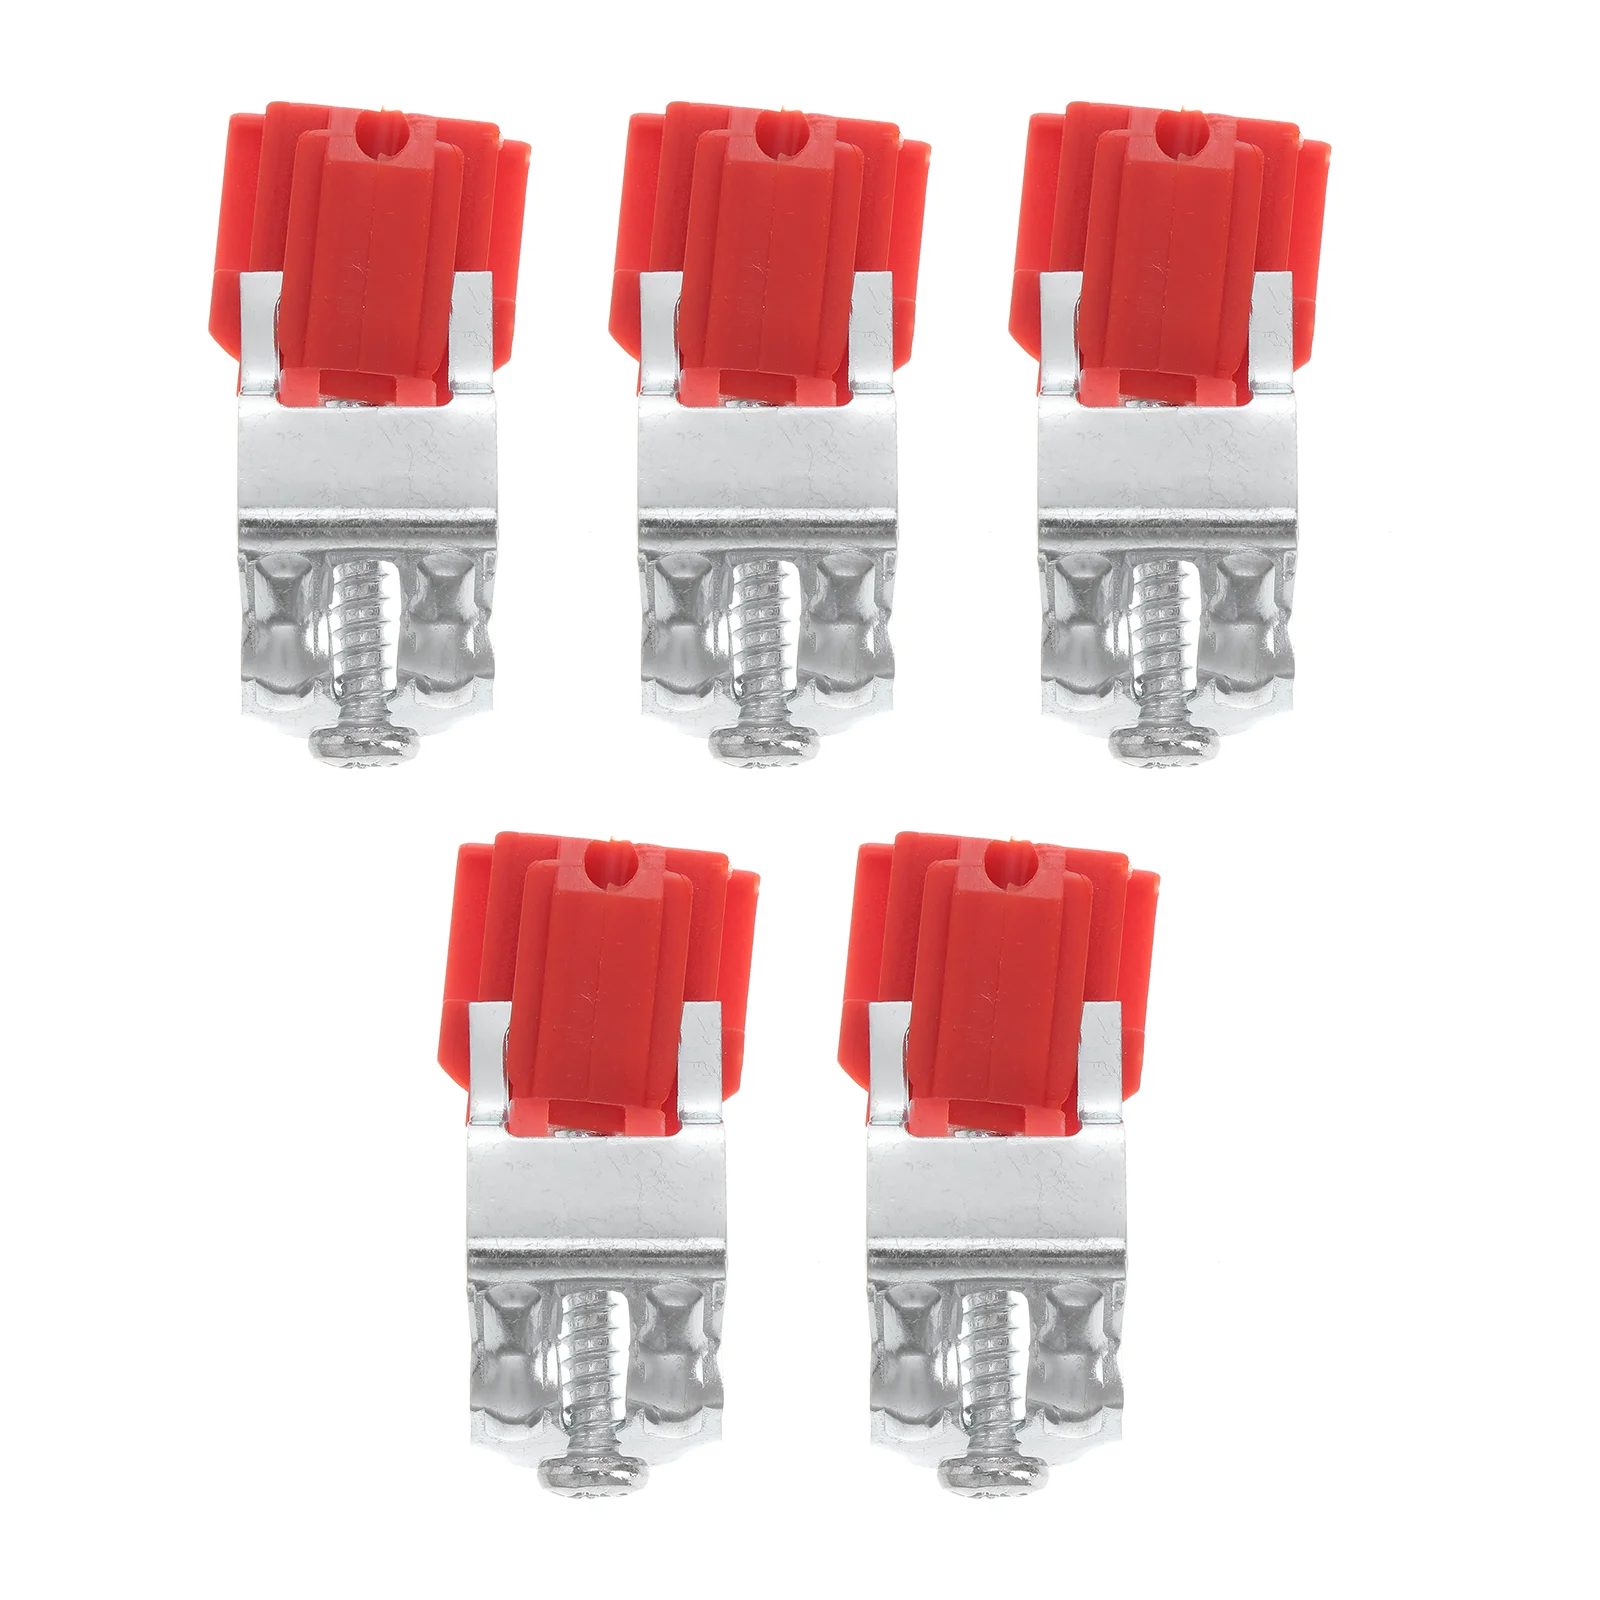 

5 Pcs Granite Tools Sink Mounting Clips Fixing Accessories Kitchen Brackets 5X2.5X1.8CM Down Supports Red Plastic